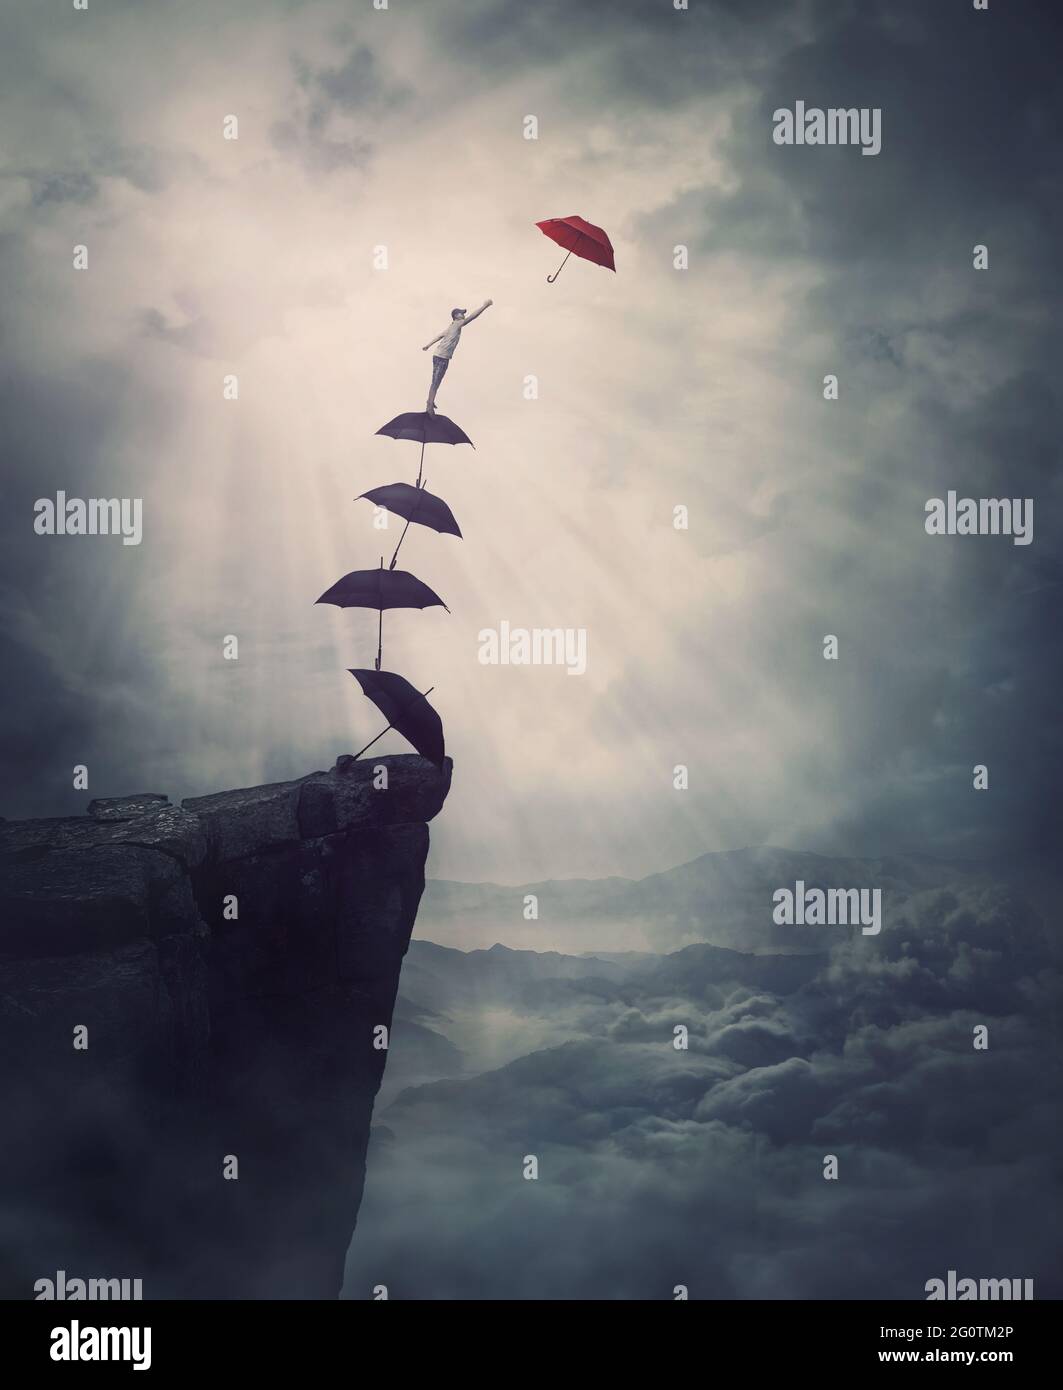 Surreal adventure, epic scene with a determined man climbing an improvised stairway of umbrellas, decided to reach a different one. Purposefulness and Stock Photo